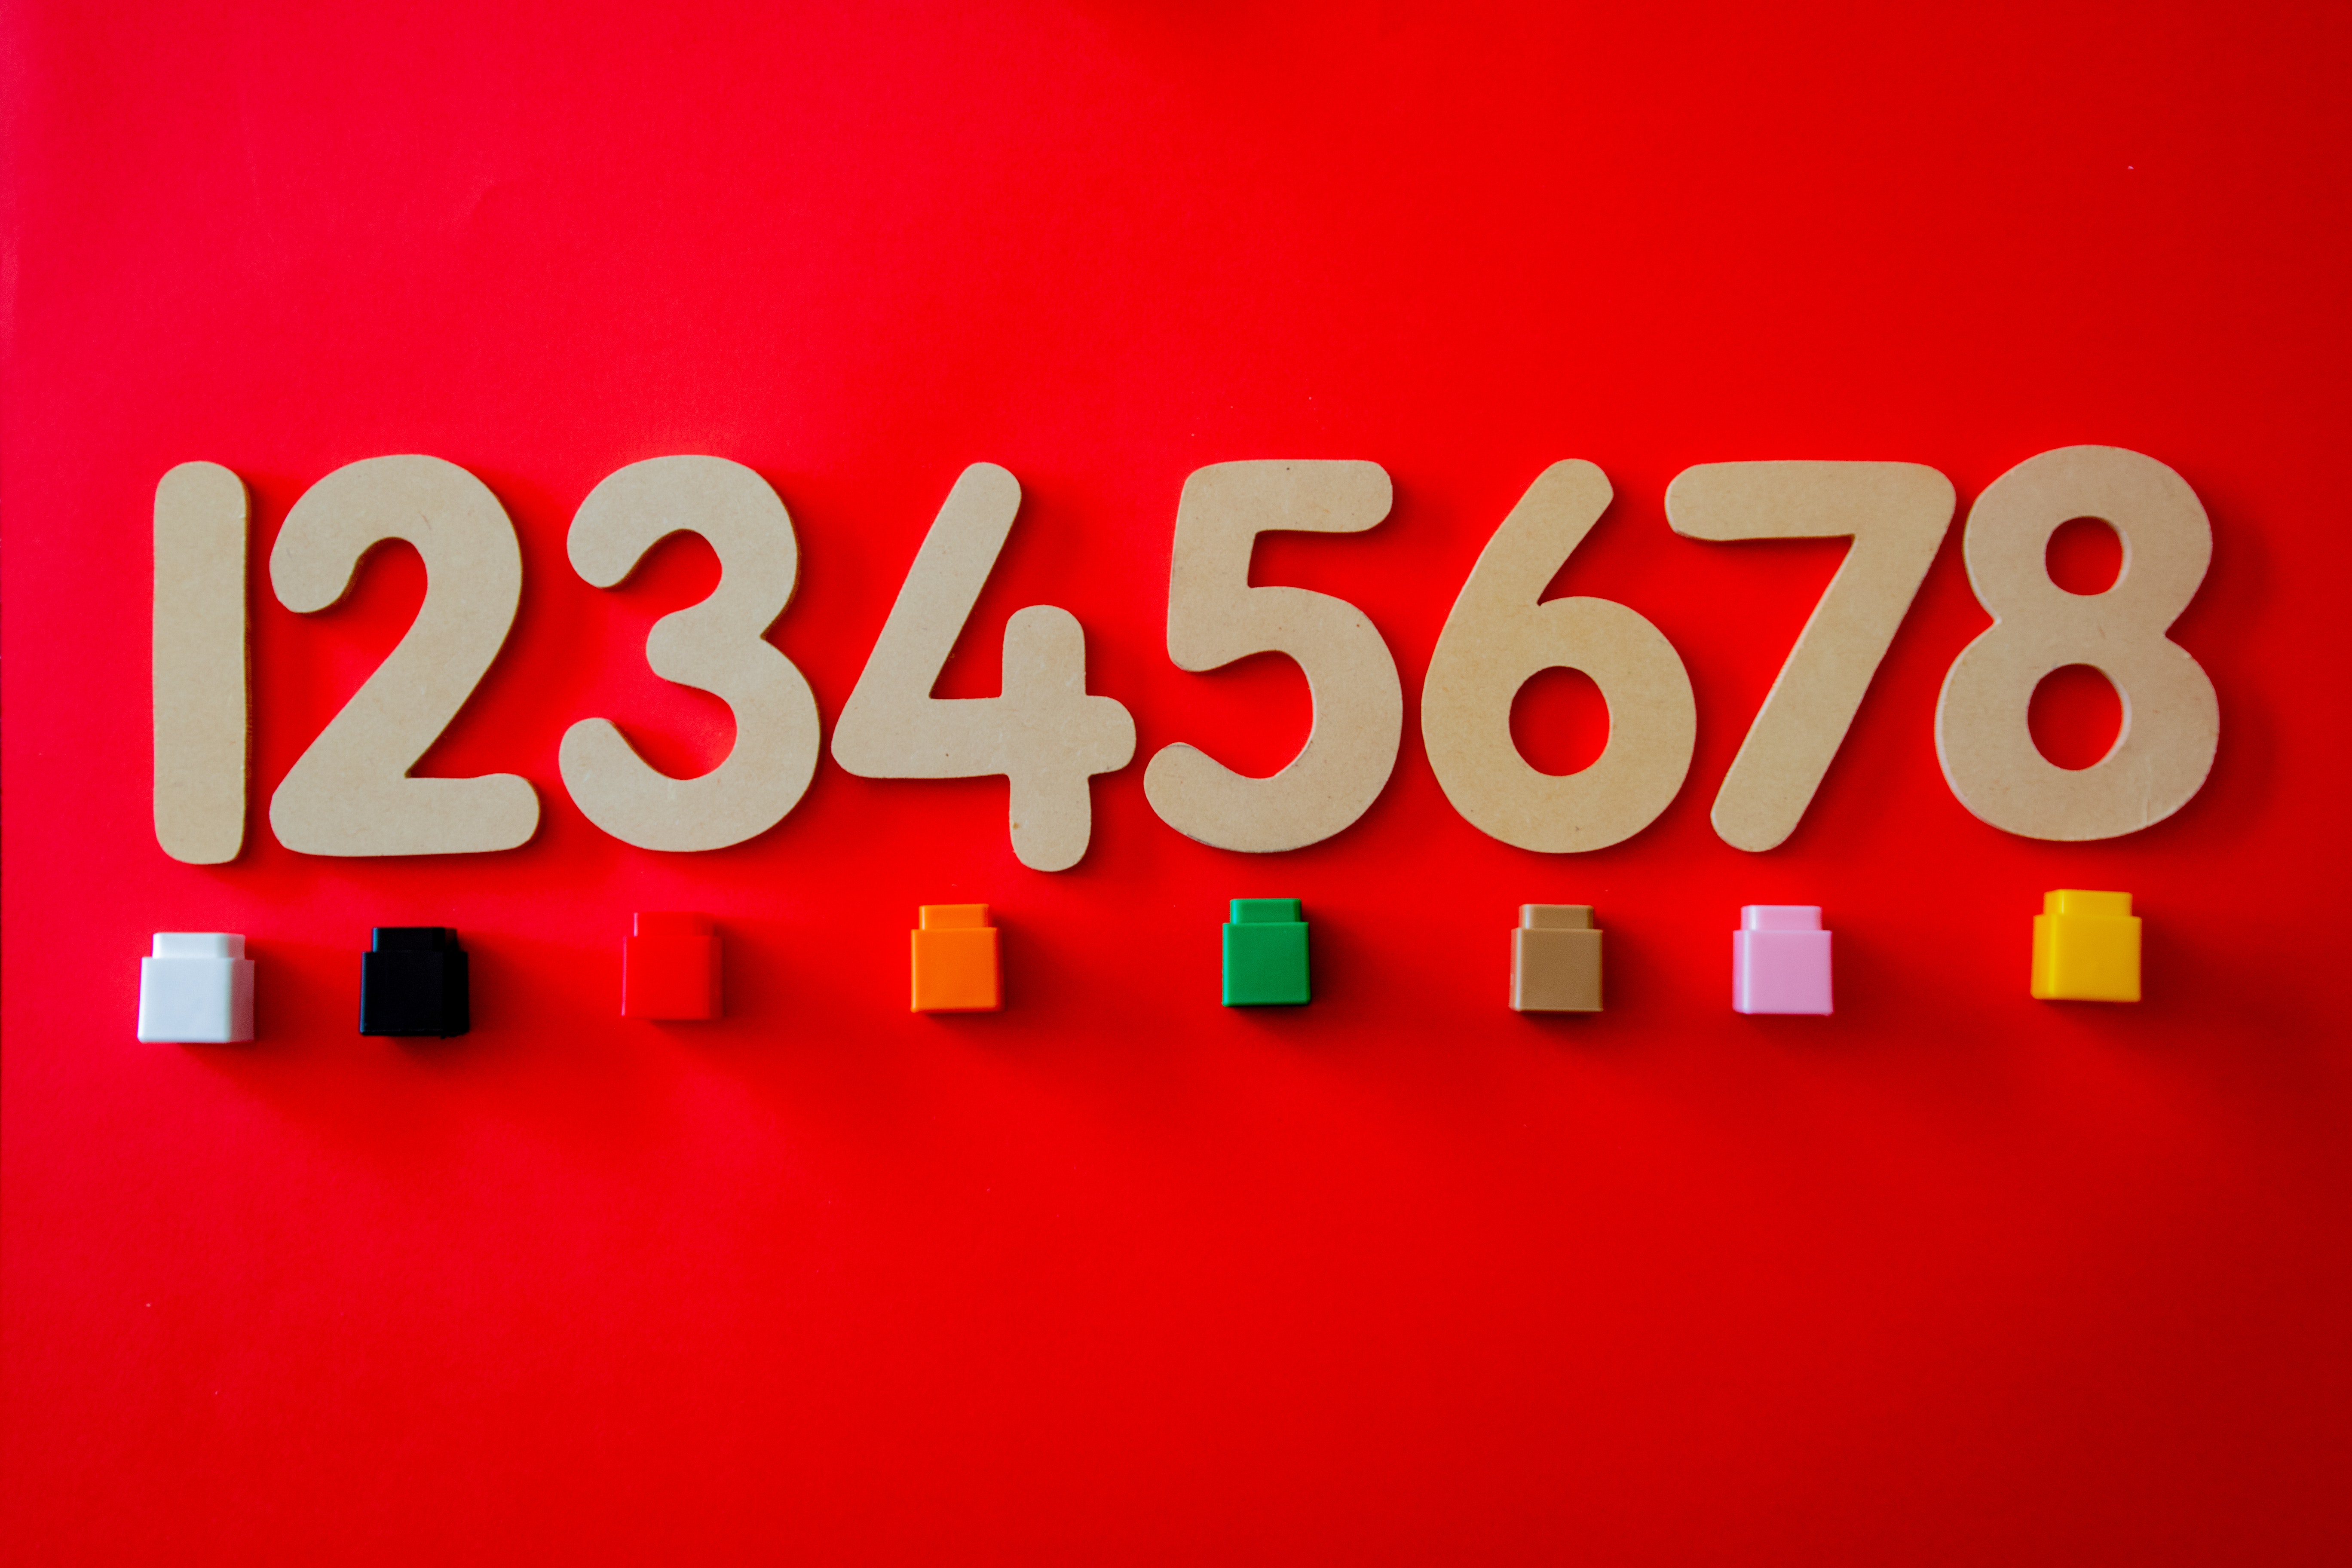 Number placed on a red surface